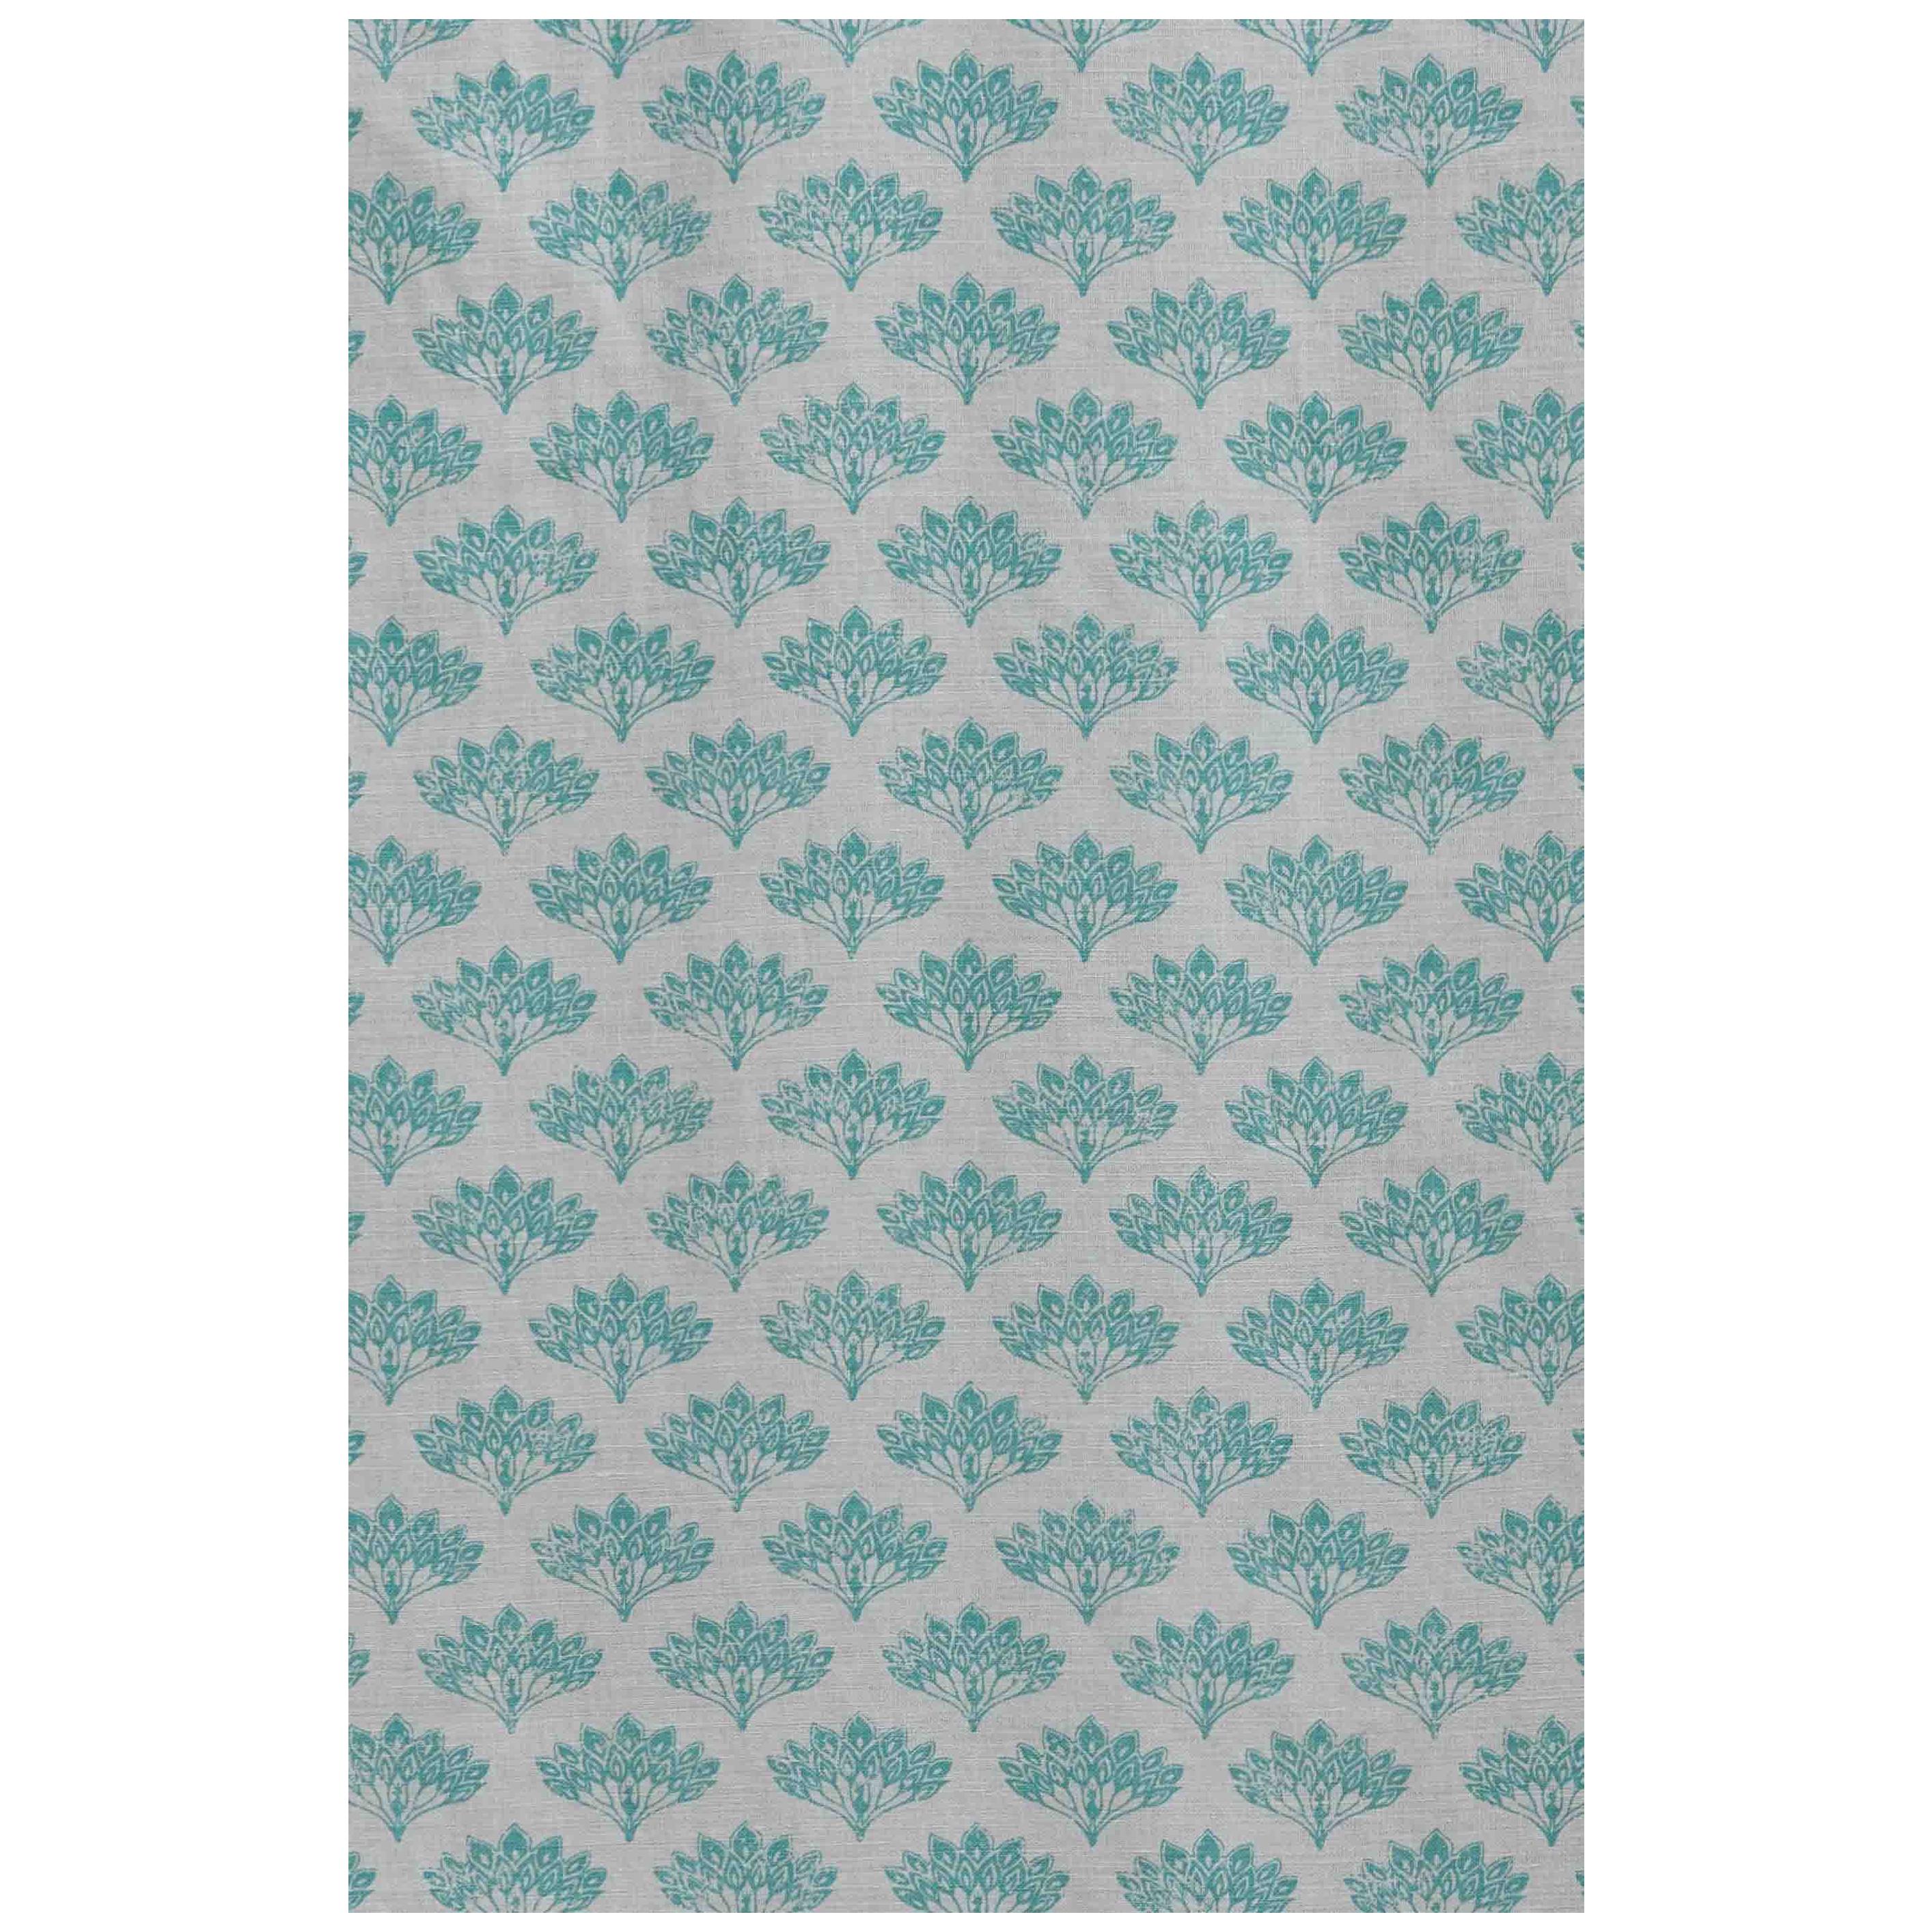 'Peacock' Contemporary, Traditional Fabric in Teal For Sale